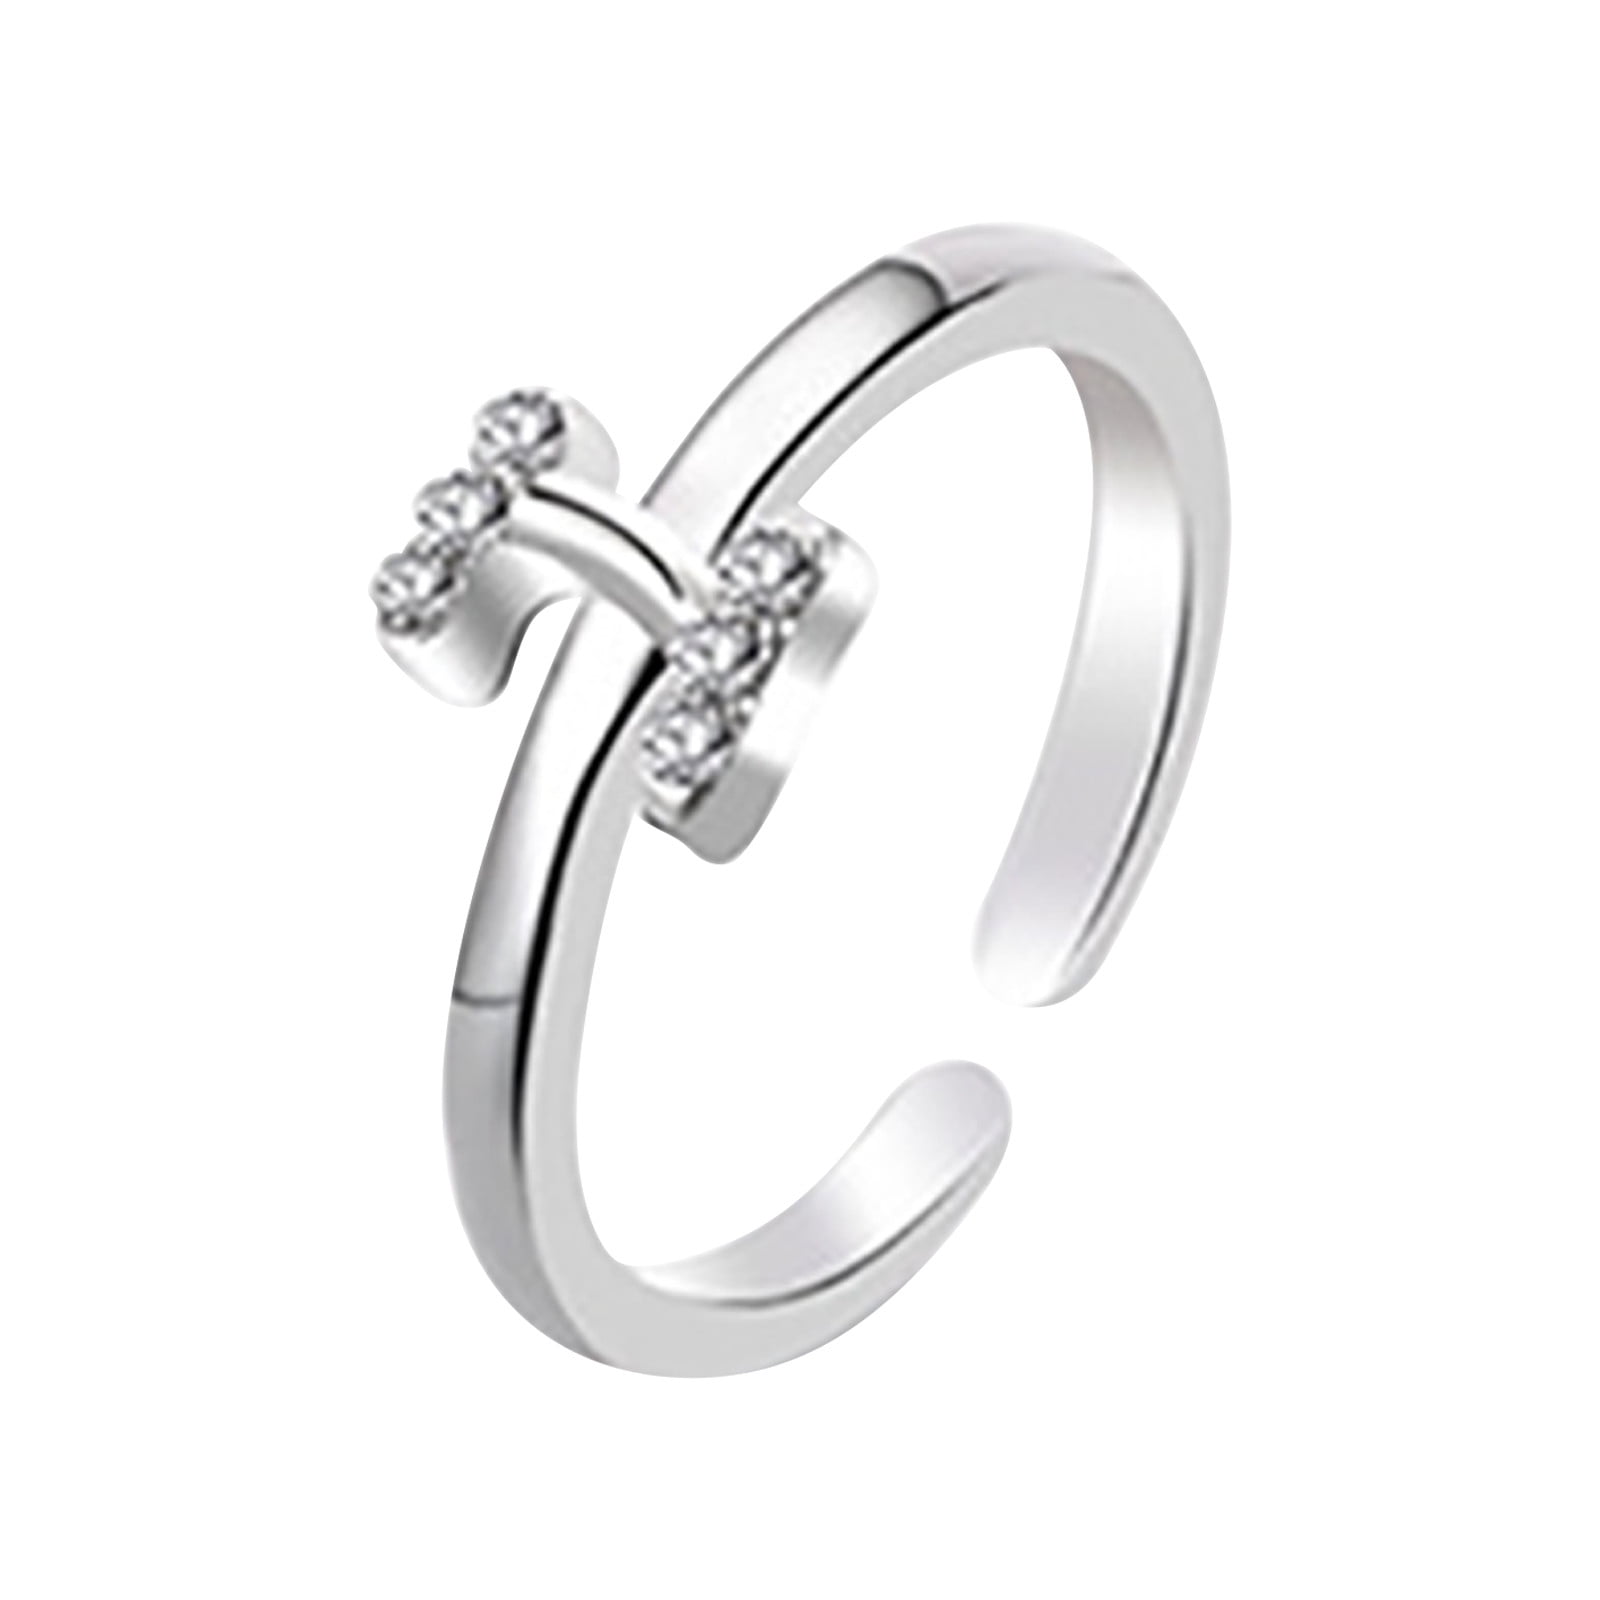 Thin Crystal Solitaire Ring | Bearfruit Jewelry